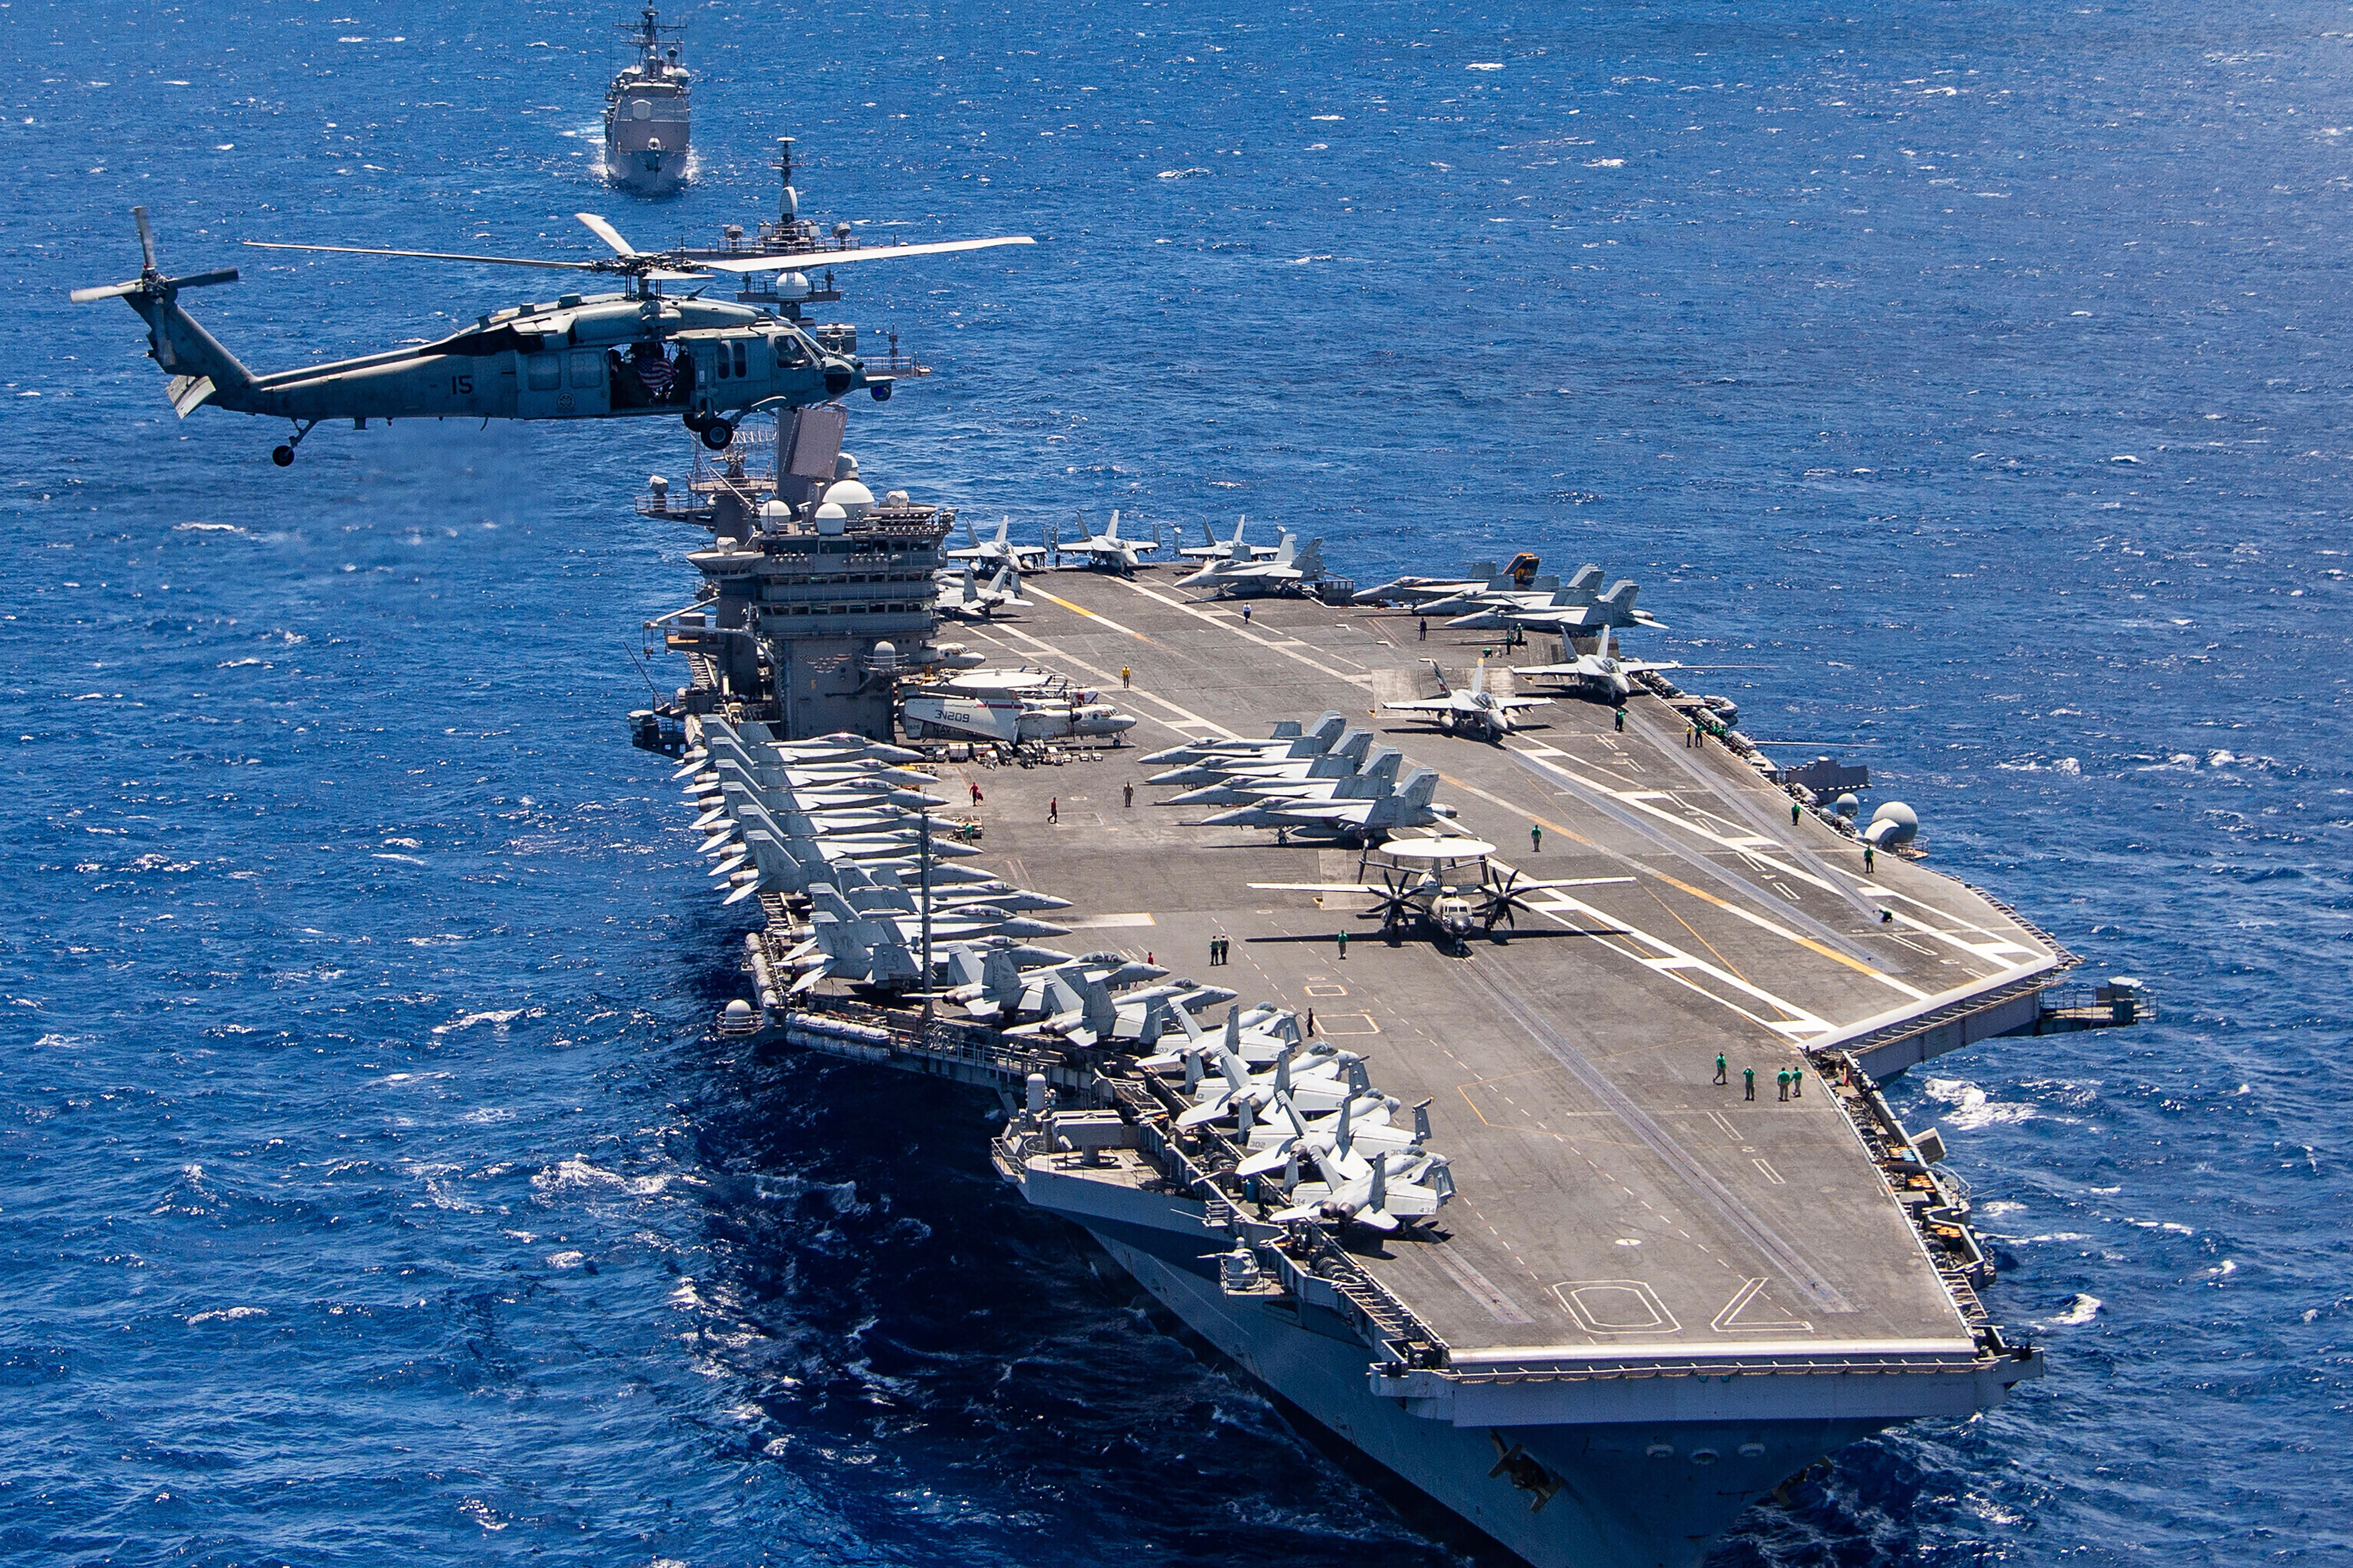 The F-35C warplane was trying to land on the deck of the aircraft carrier USS Carl Vinson